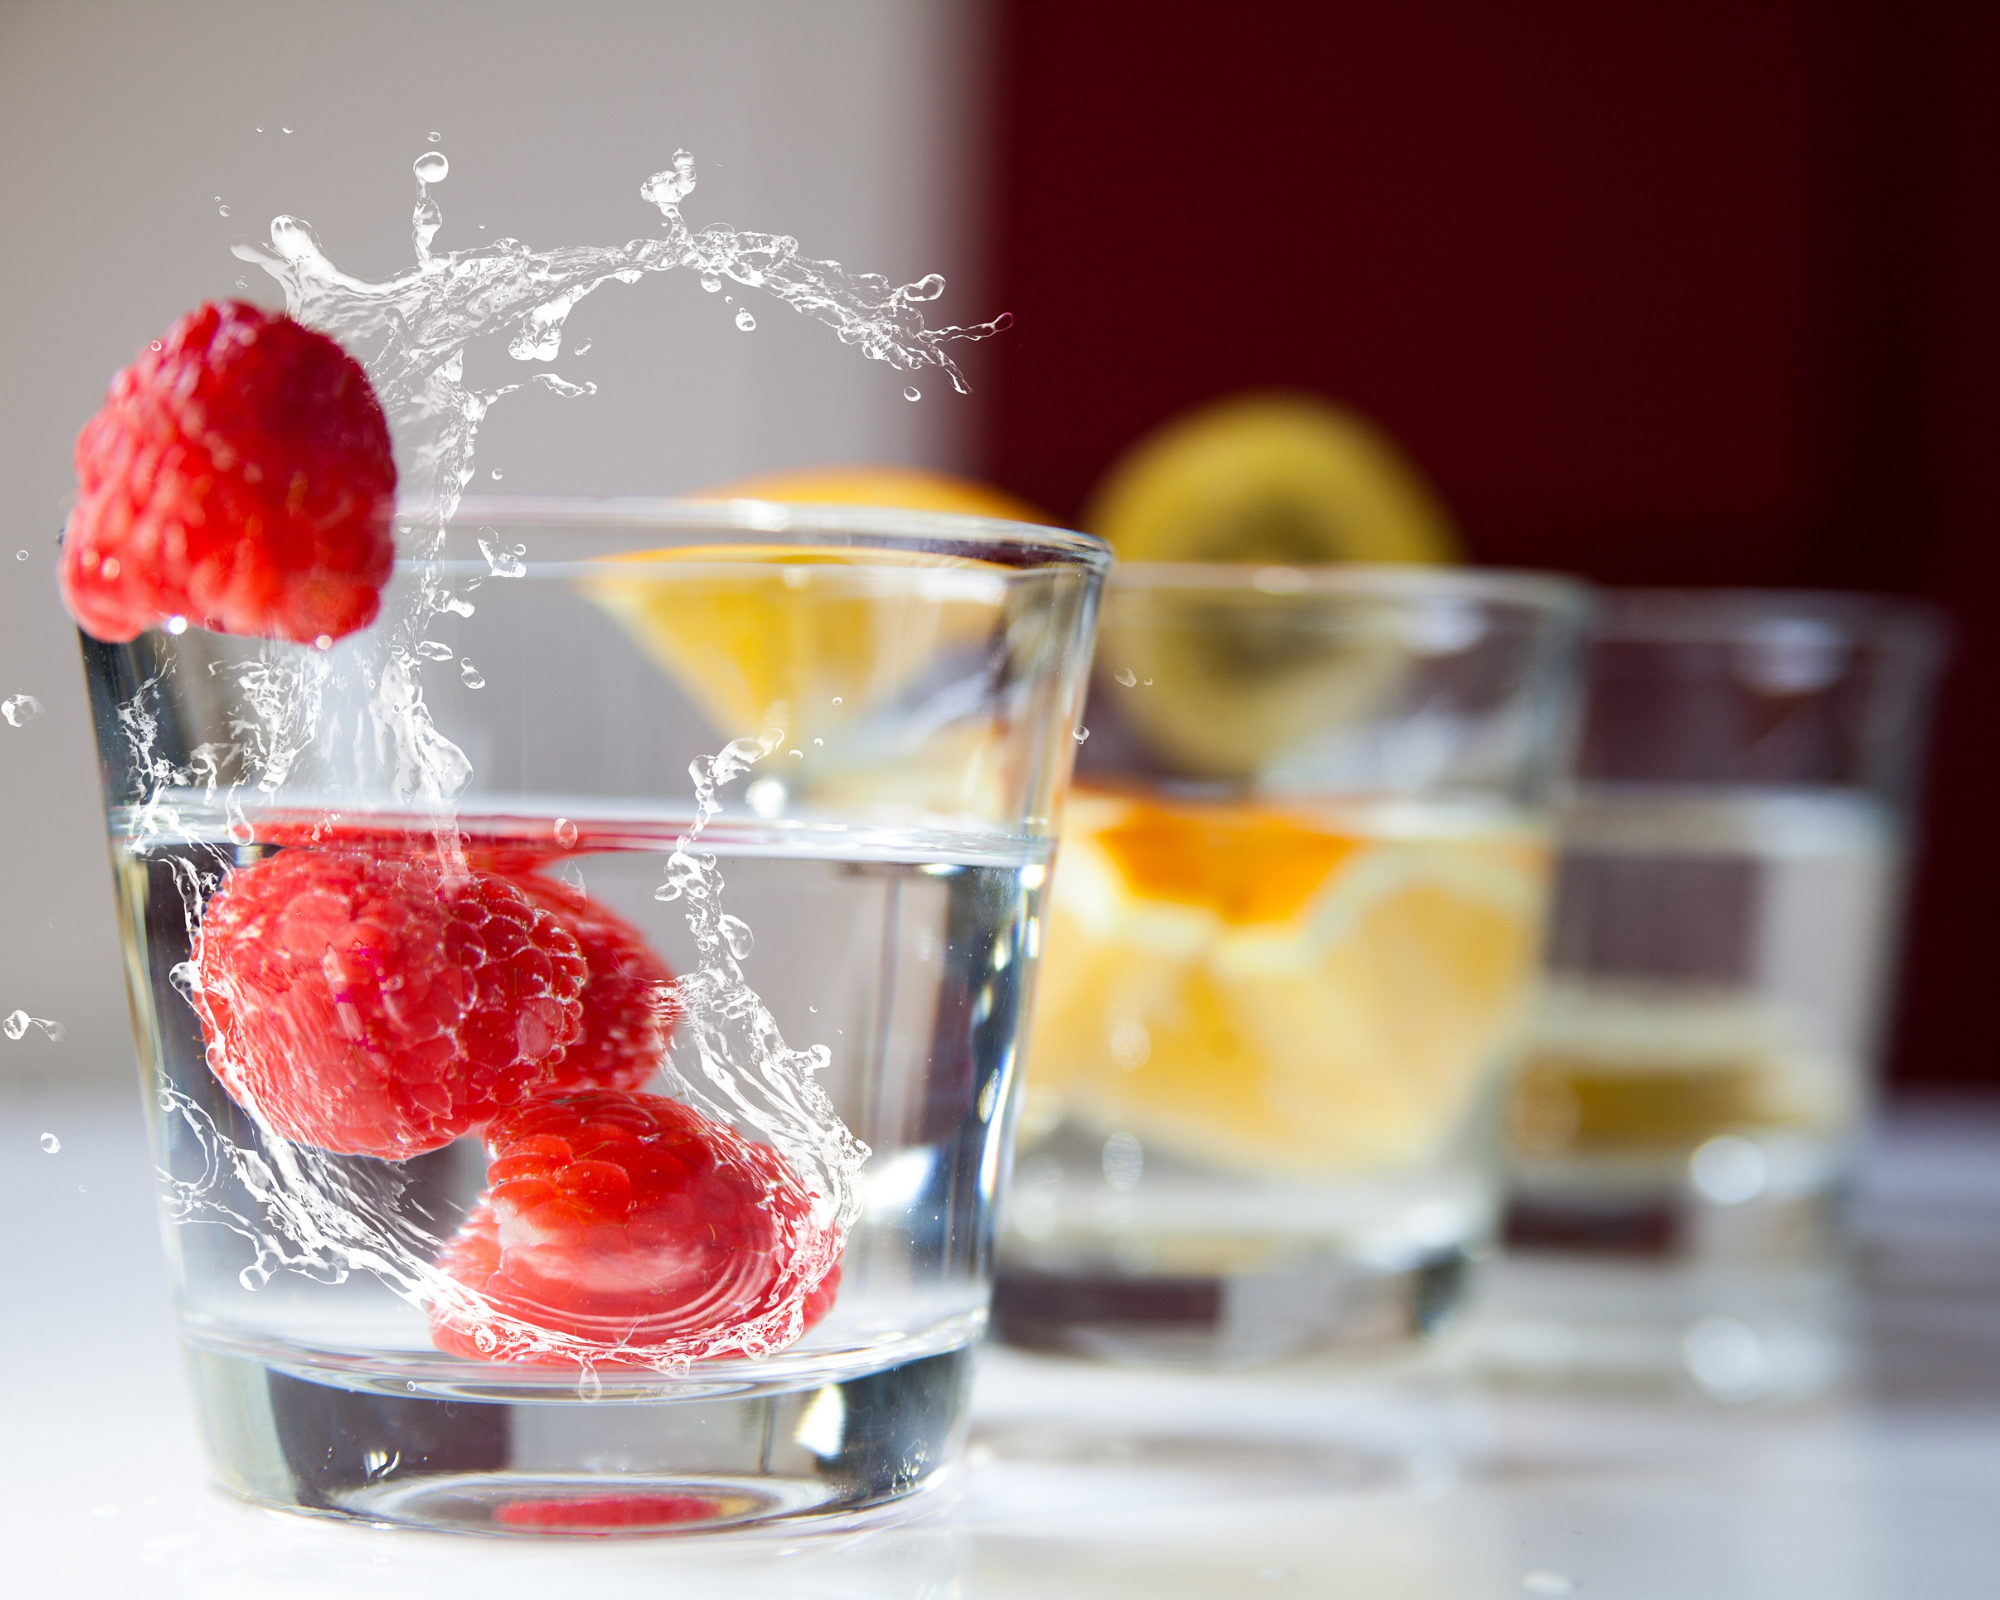 Featured image for “Sip Smarter, Live Better: Your Guide to Healthier Beverage Options”